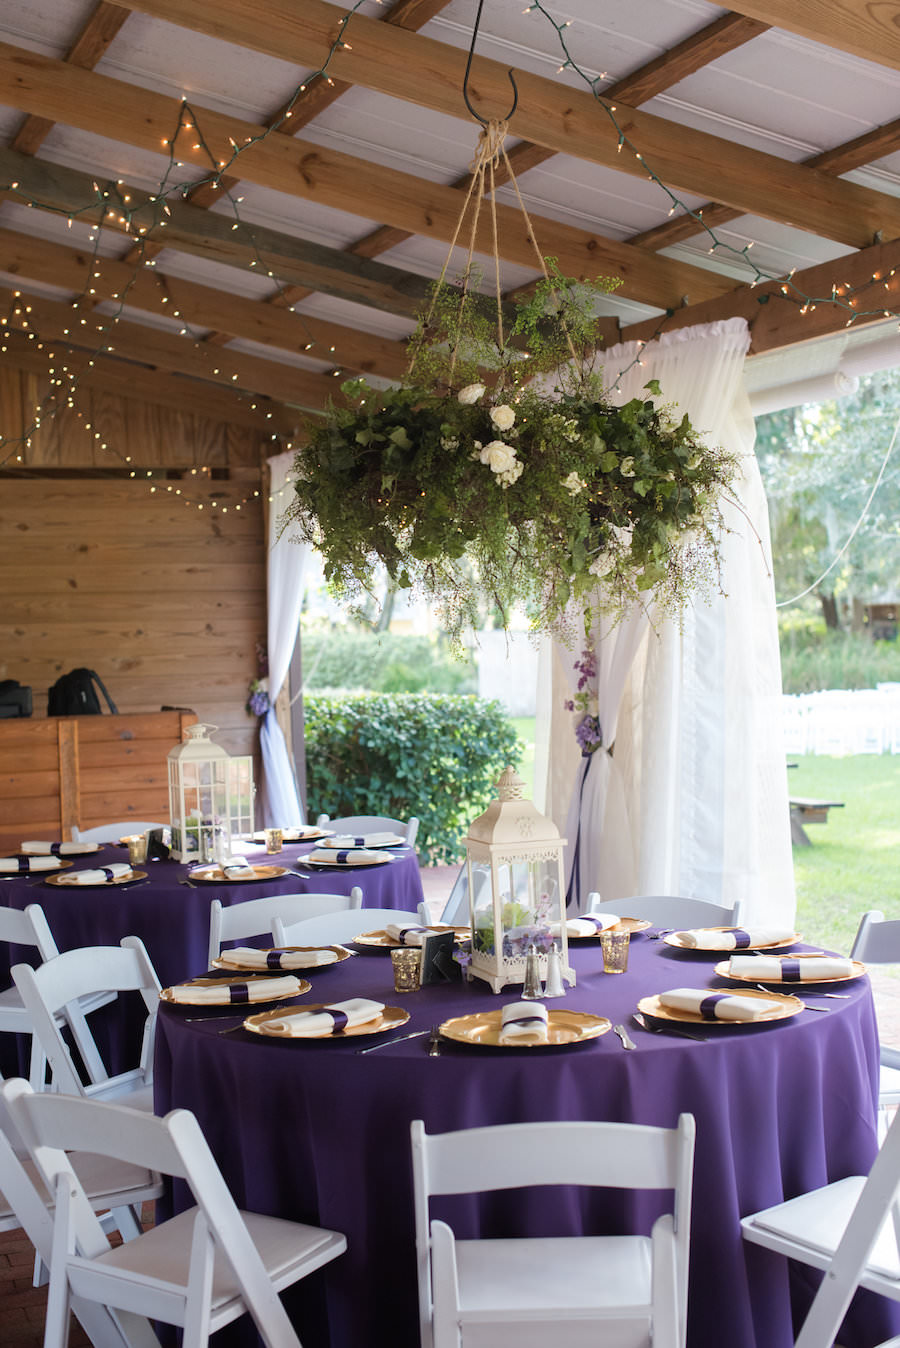 White Lantern Wedding Centerpieces with Gold Chargers on Purple Linens with White Resin Folding Chairs and Hanging Greenery Centerpiece Suspended from Ceiling | Tampa Bay Wedding Venue Cross Creek Ranch